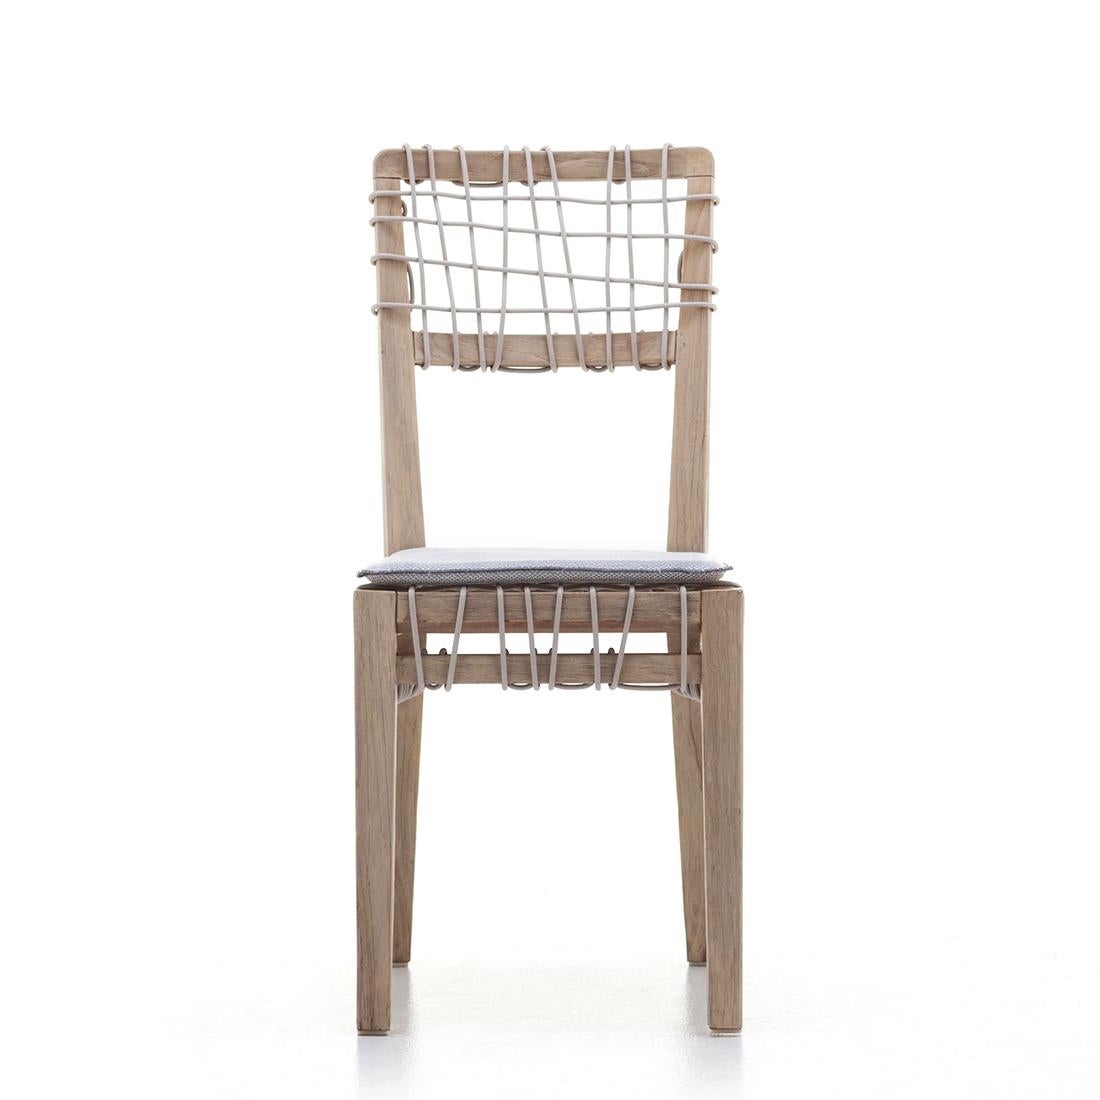 Chair raw teak with all structure in natural teak 
in washed finish. Seat and back rest in HDPE 
woven resin cord made for outdoor use.
With cushion seat in light grey outdoor fabric included.